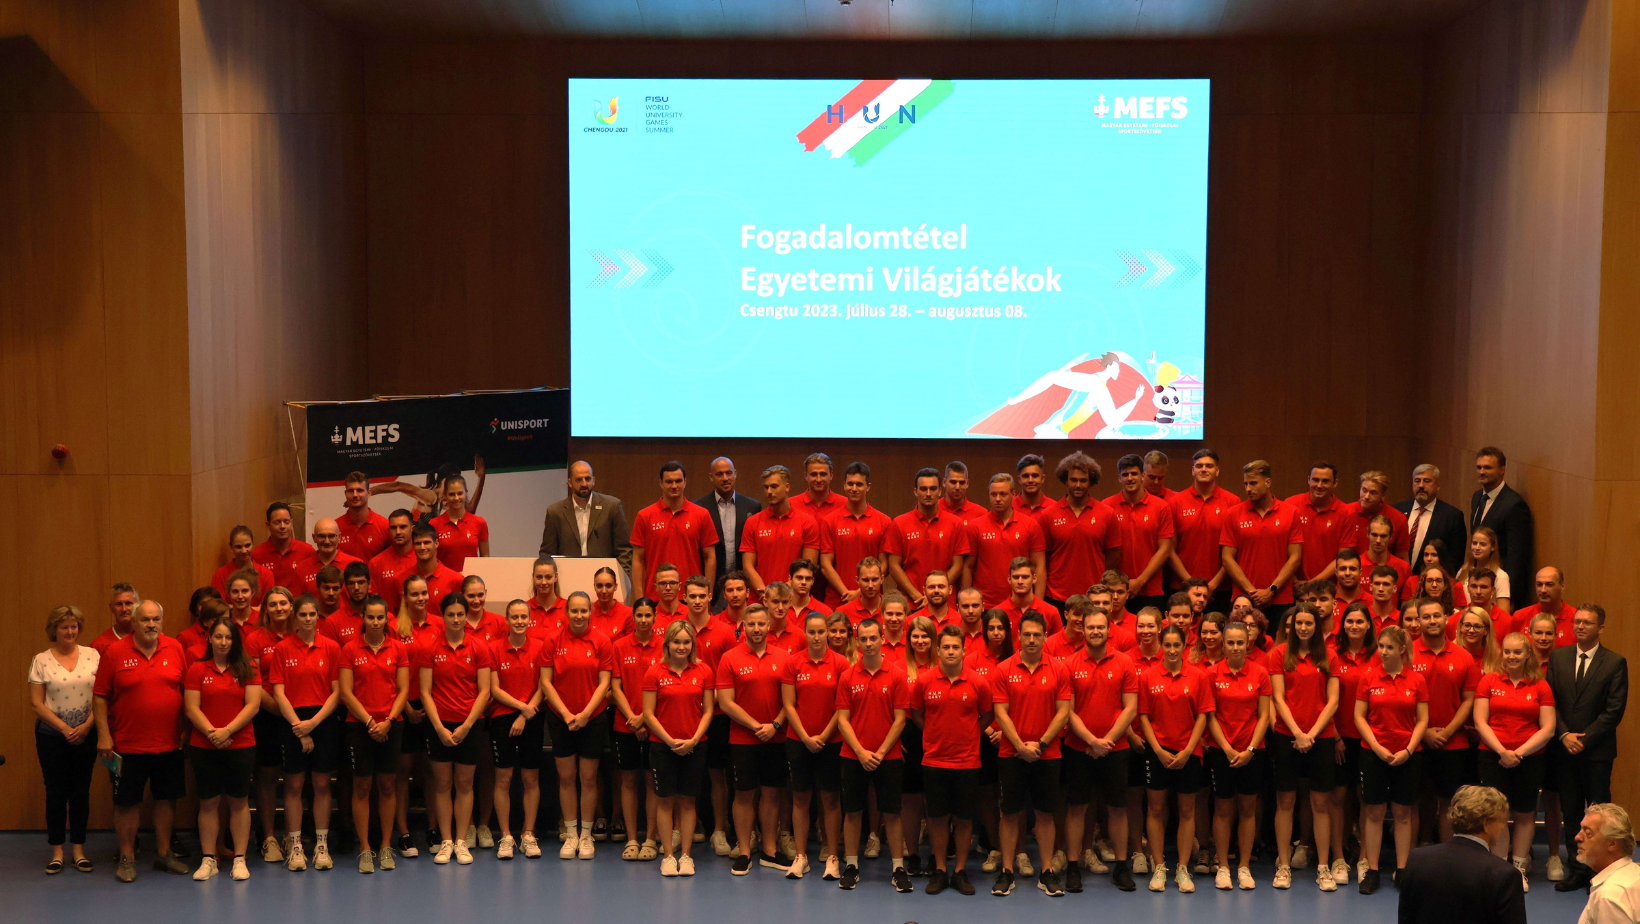 HUSS presents the largest delegation of athletes at the Summer World University Games